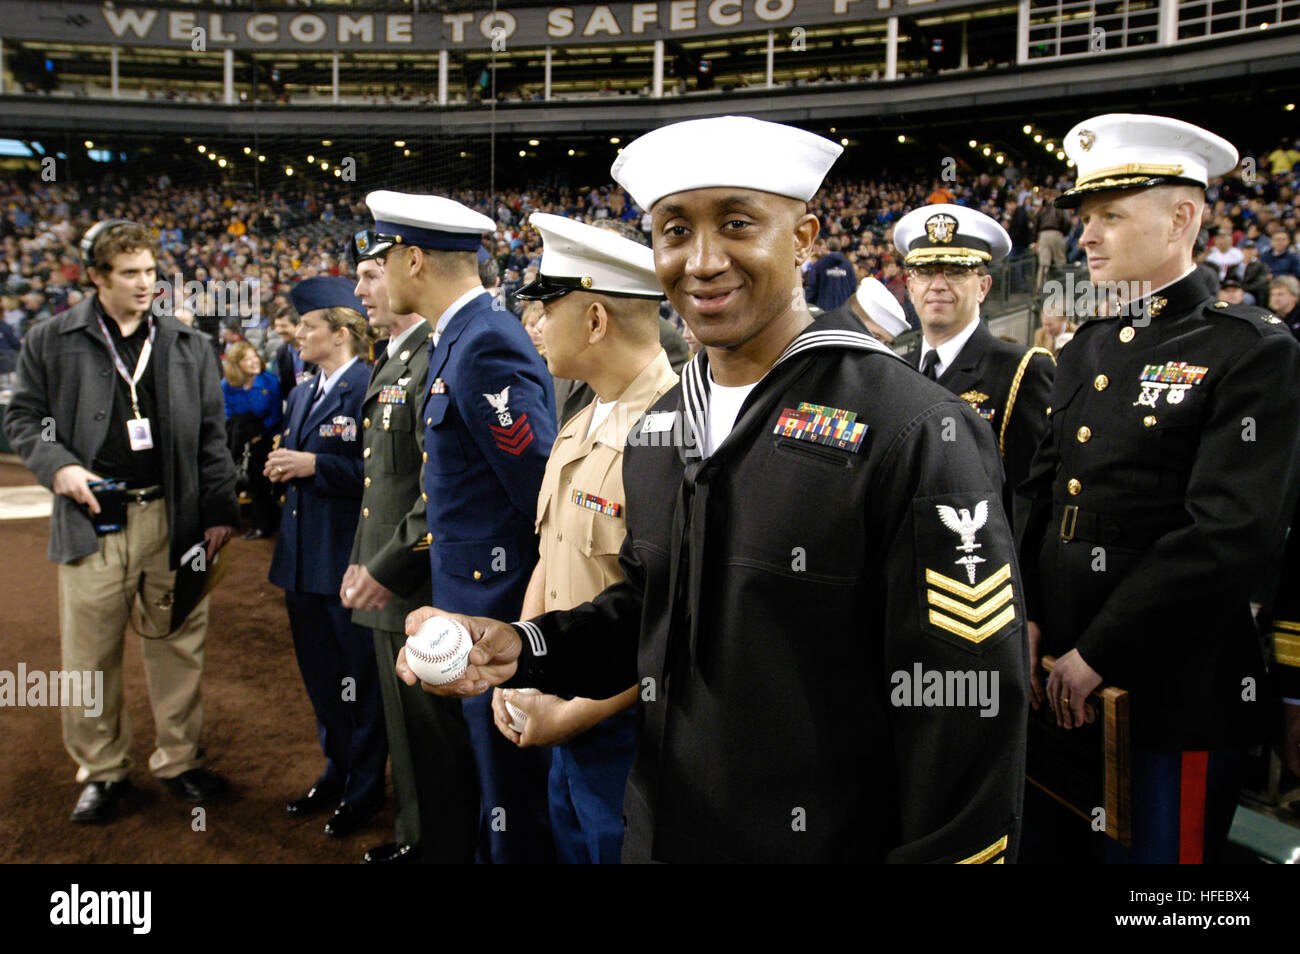 050405-N-6477M-340 Seattle, Wash. (Apr. 5, 2005) Ð Hospital Corpsman 1st Class Jermaine K. Williams, assigned to Naval Hospital Bremerton, Wash., prepares to take the field to throw the first pitch during the ÒBoeing Salute to Armed Forces NightÓ at SAFCO Field, Seattle Wash. The Mariners home season opening game was preceded by performances of the Joint Forces Band Northwest, U.S Marine Corps Drill Team, parading of the colors by Joint Forces Color Guard and the presentation of a 72 x 48 foot U.S. Flag by the U.S. Coast Guard. The U.S. Navy Band Vocal Quartet sang the National Anthem. U.S. Na Stock Photo